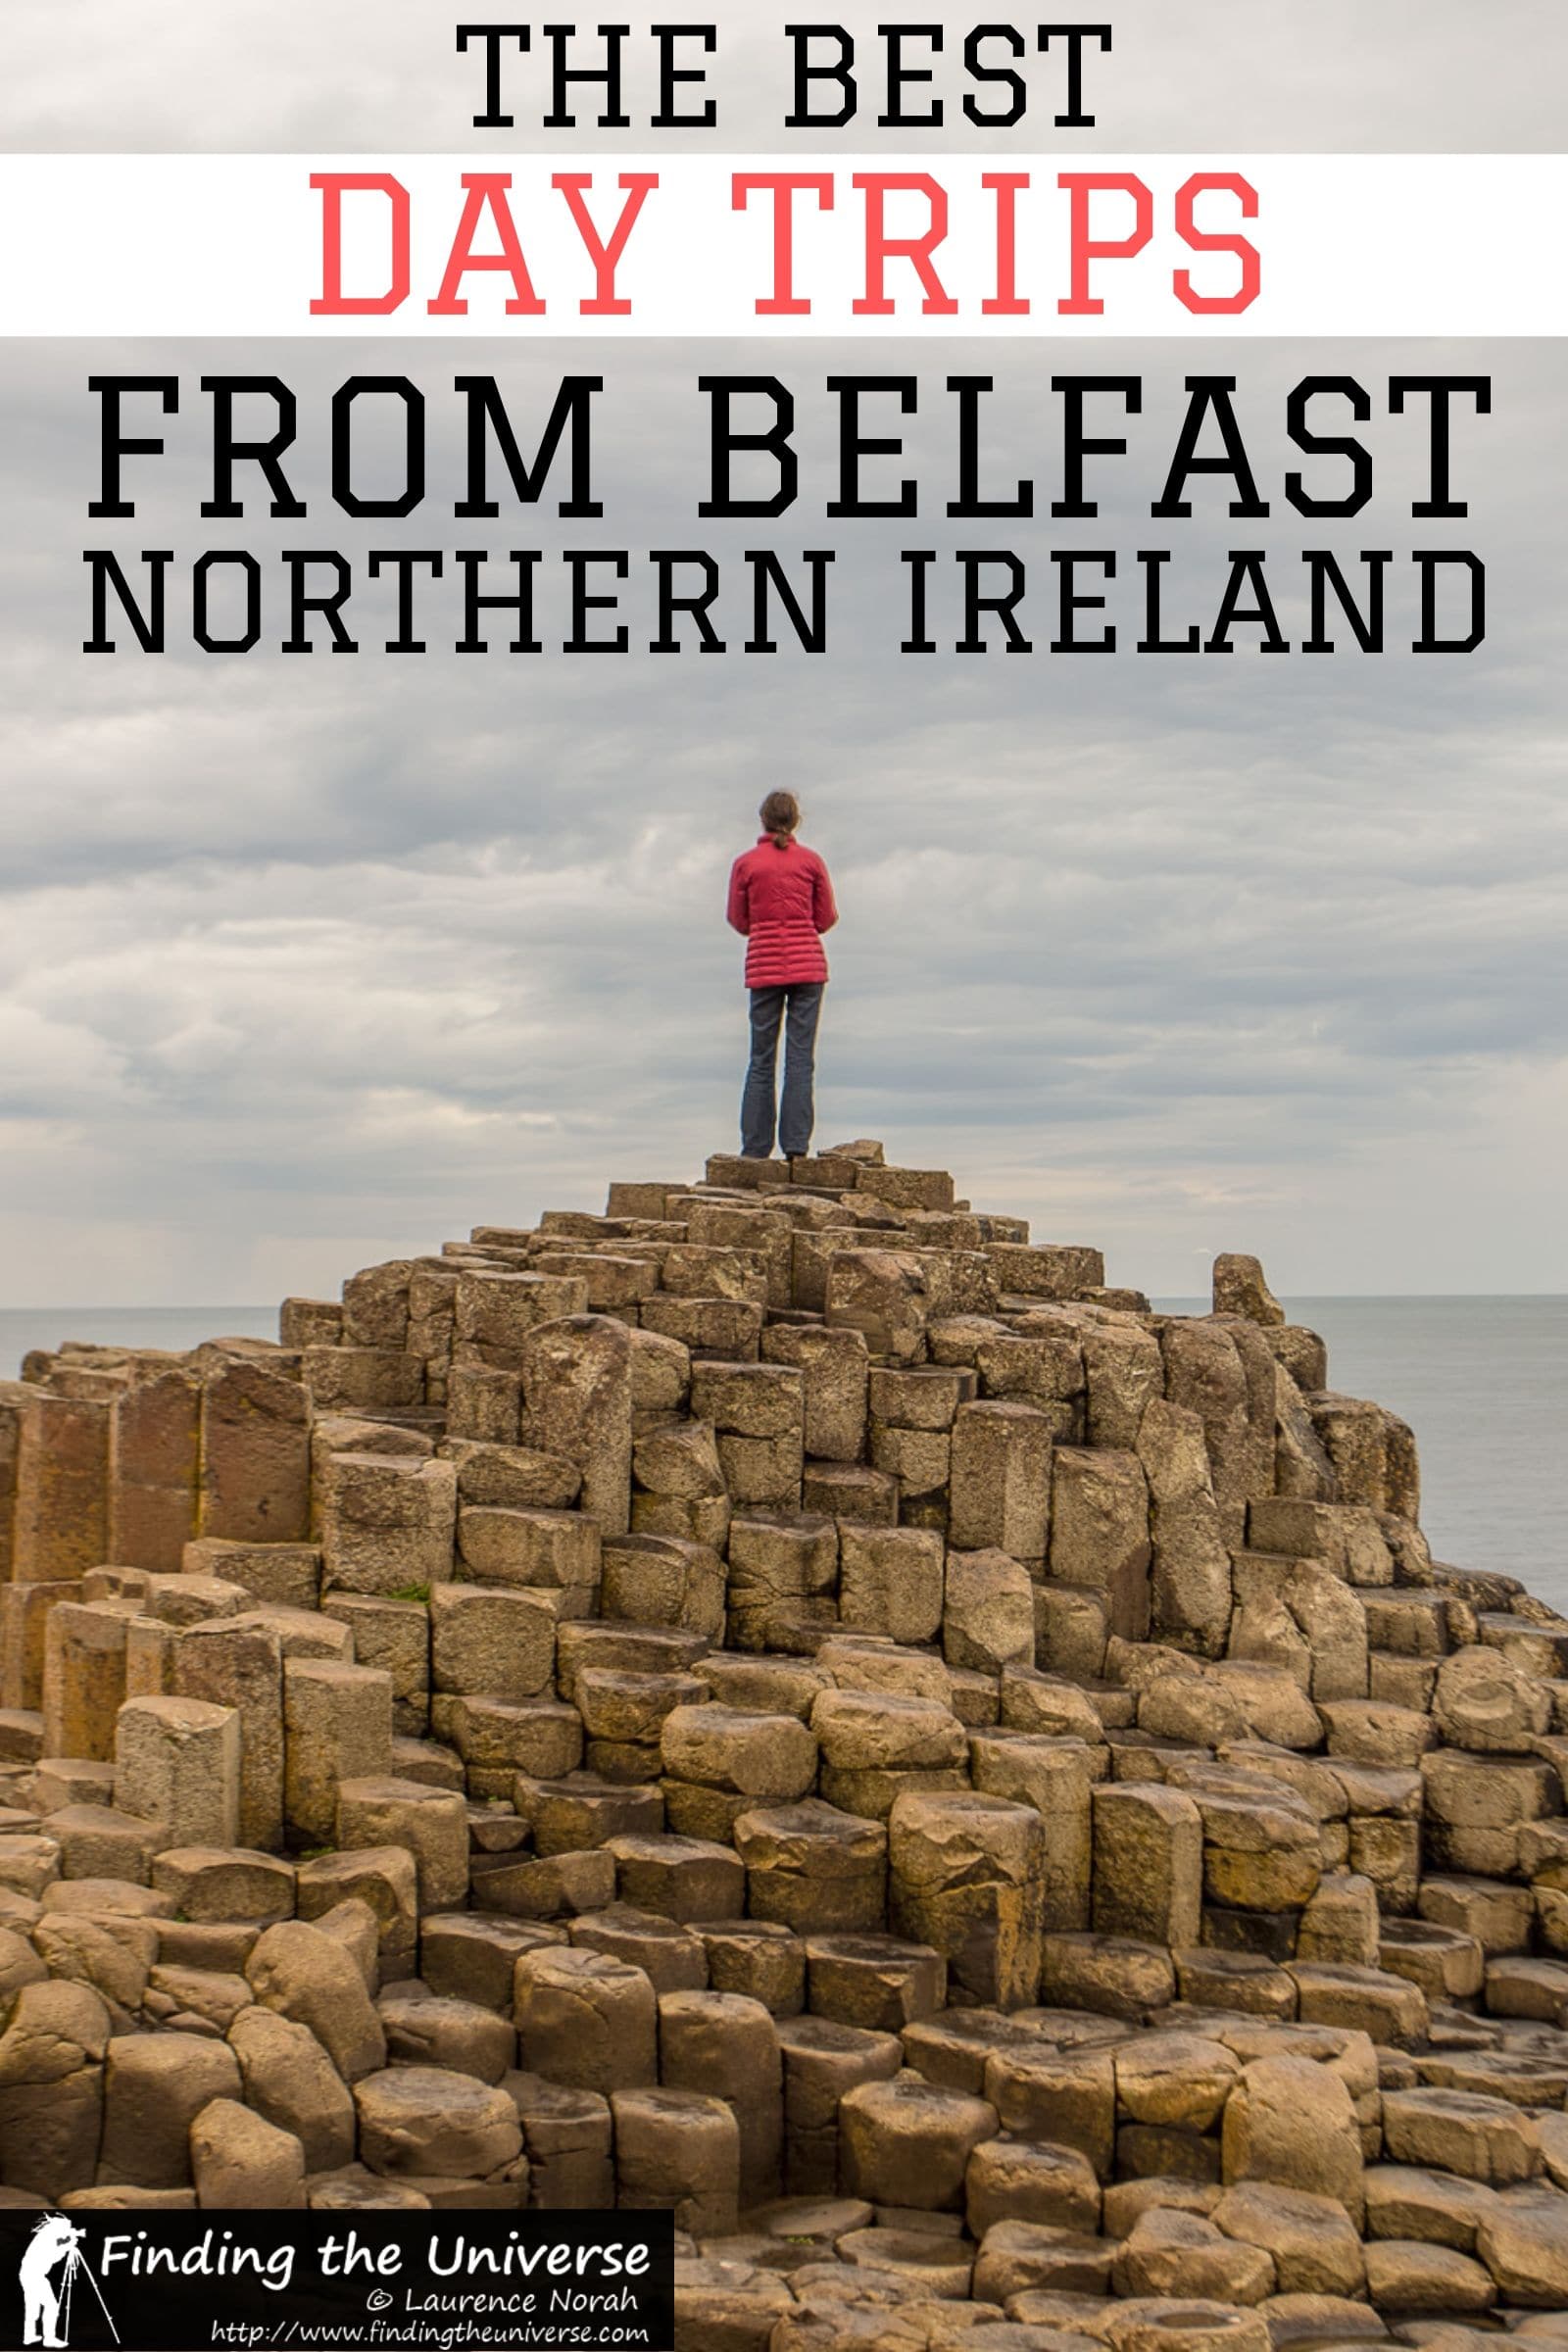 A guide to some of the best day trips from Belfast, including the coastal causeway route, game of thrones filming locations, St. Patrick's Way and more!